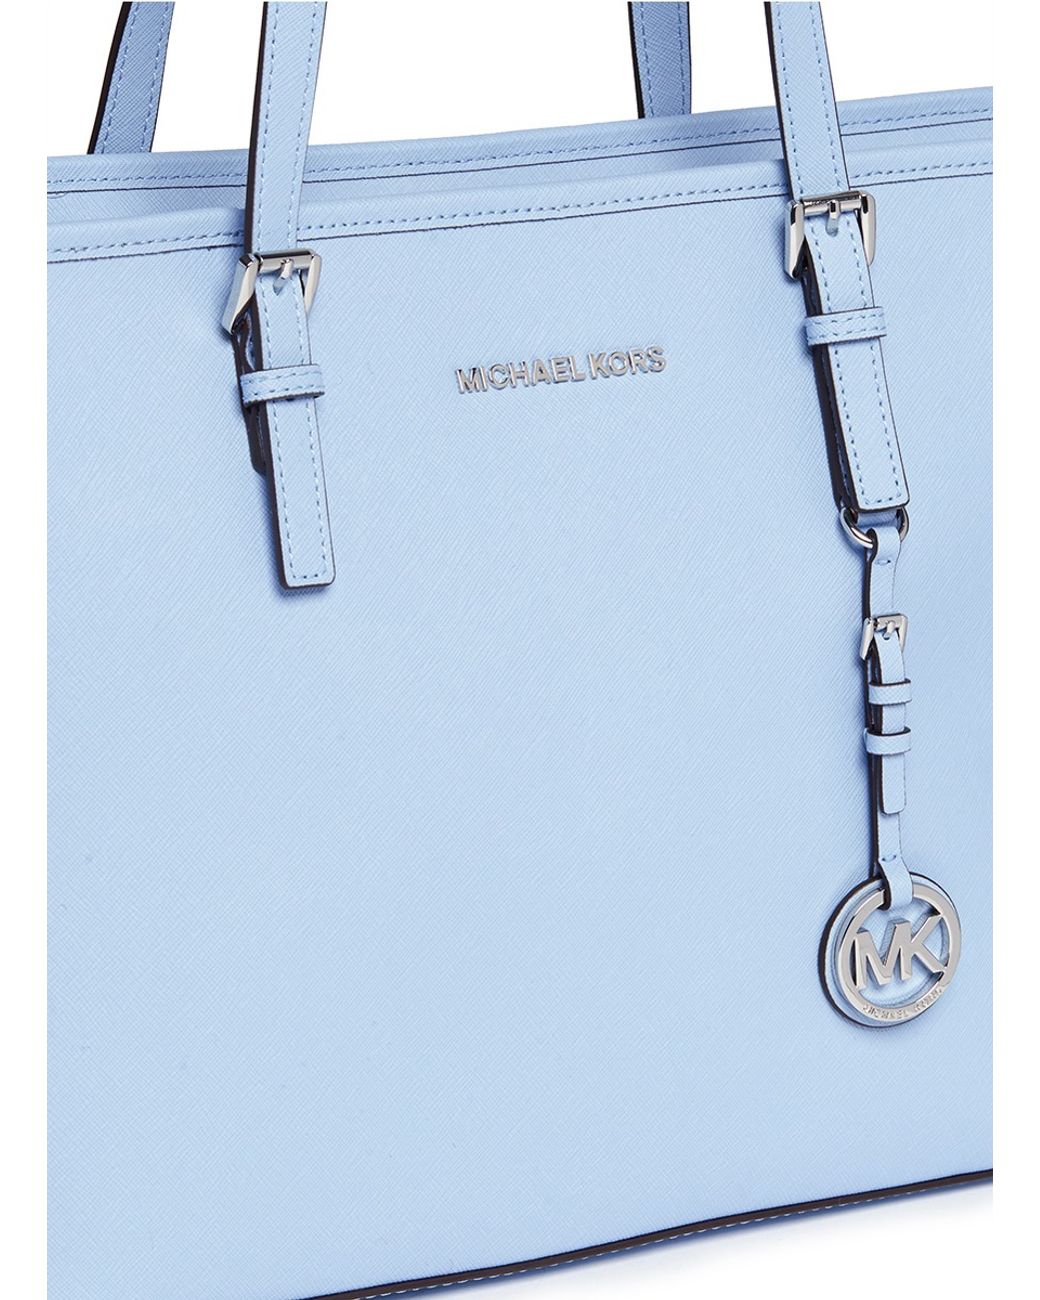 Michael Kors XS Carry All Jet Set Travel Womens Tote (Pale Ocean